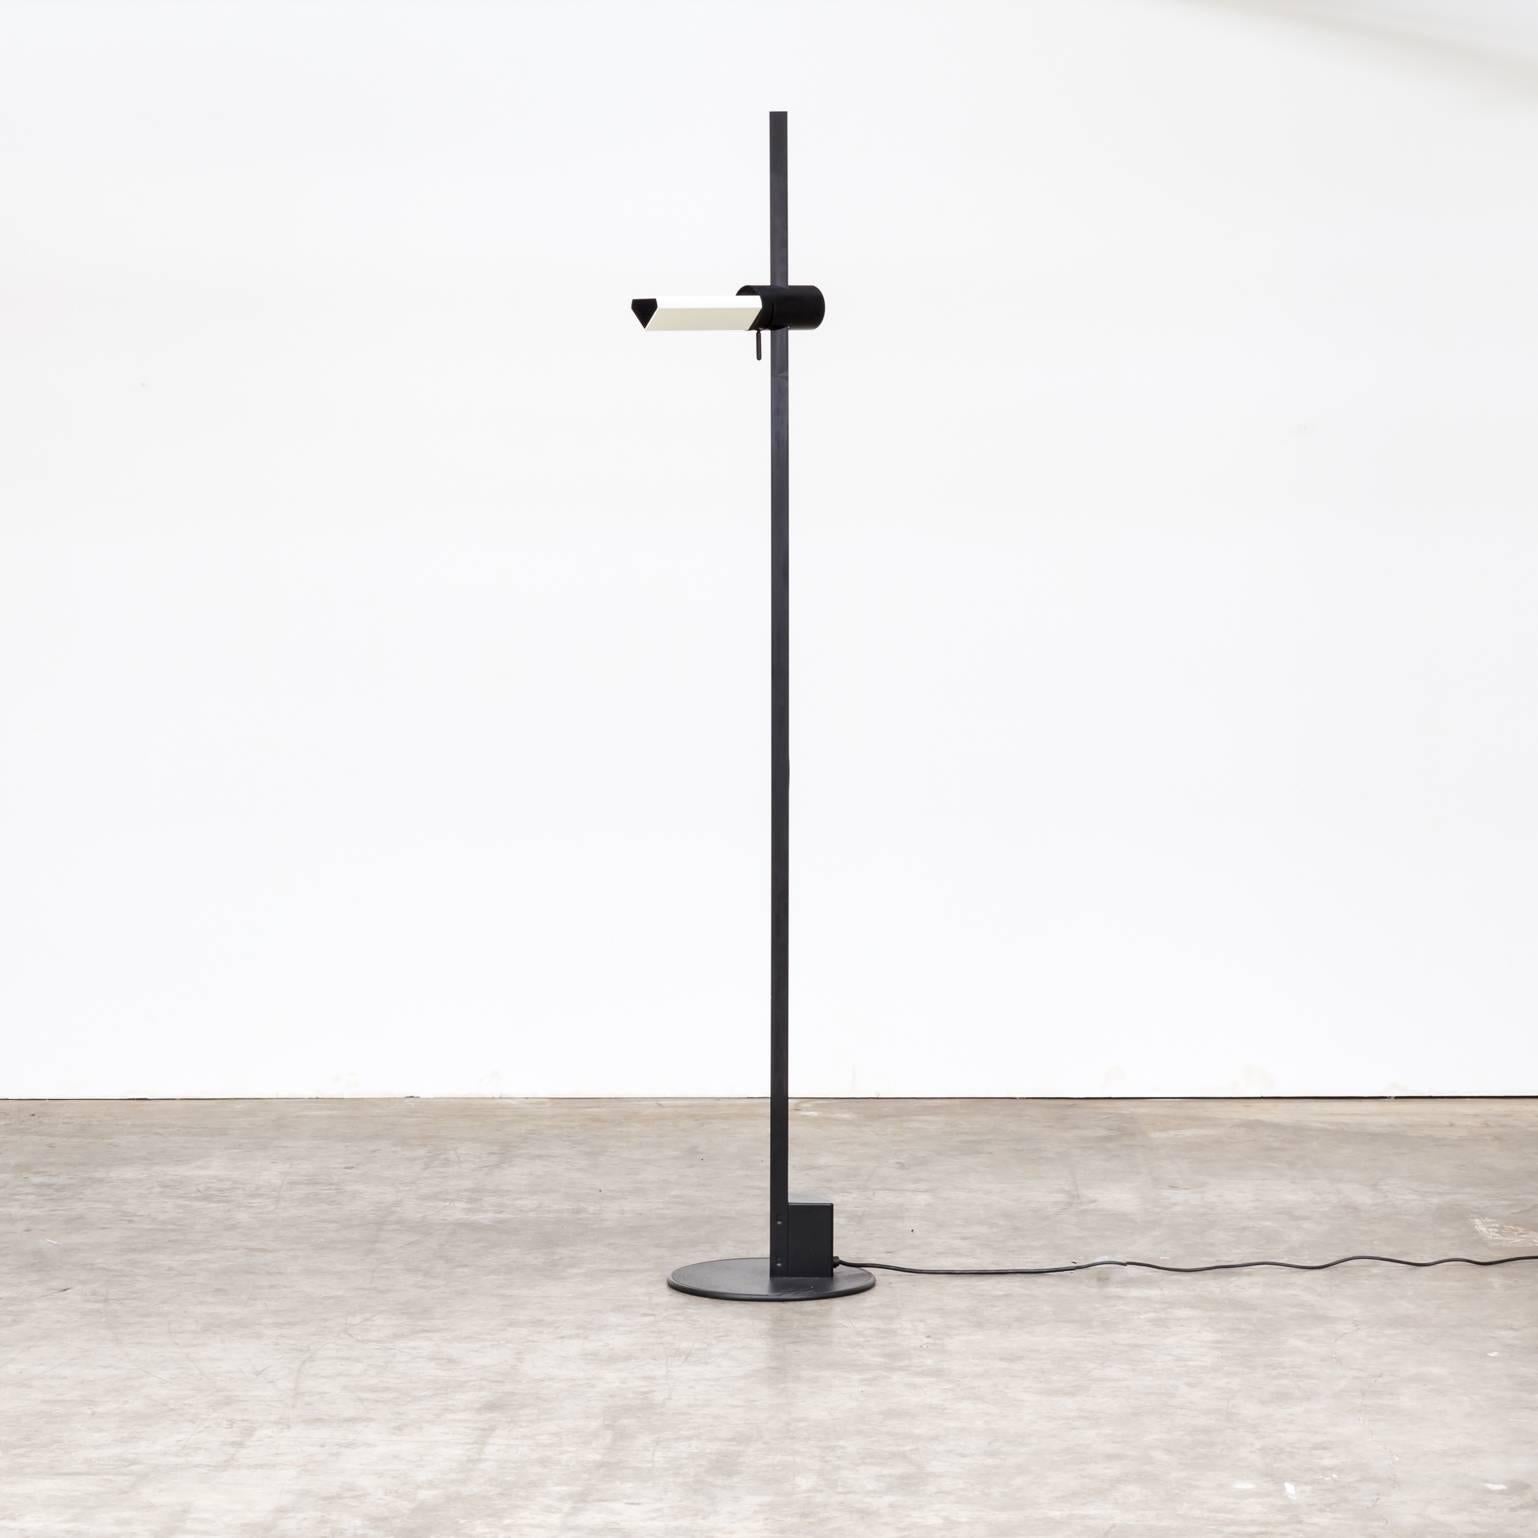 Gianfranco Frattini ‘Caltha’ adjustable floor lamp for Luci. Good condition consistent with age and use.